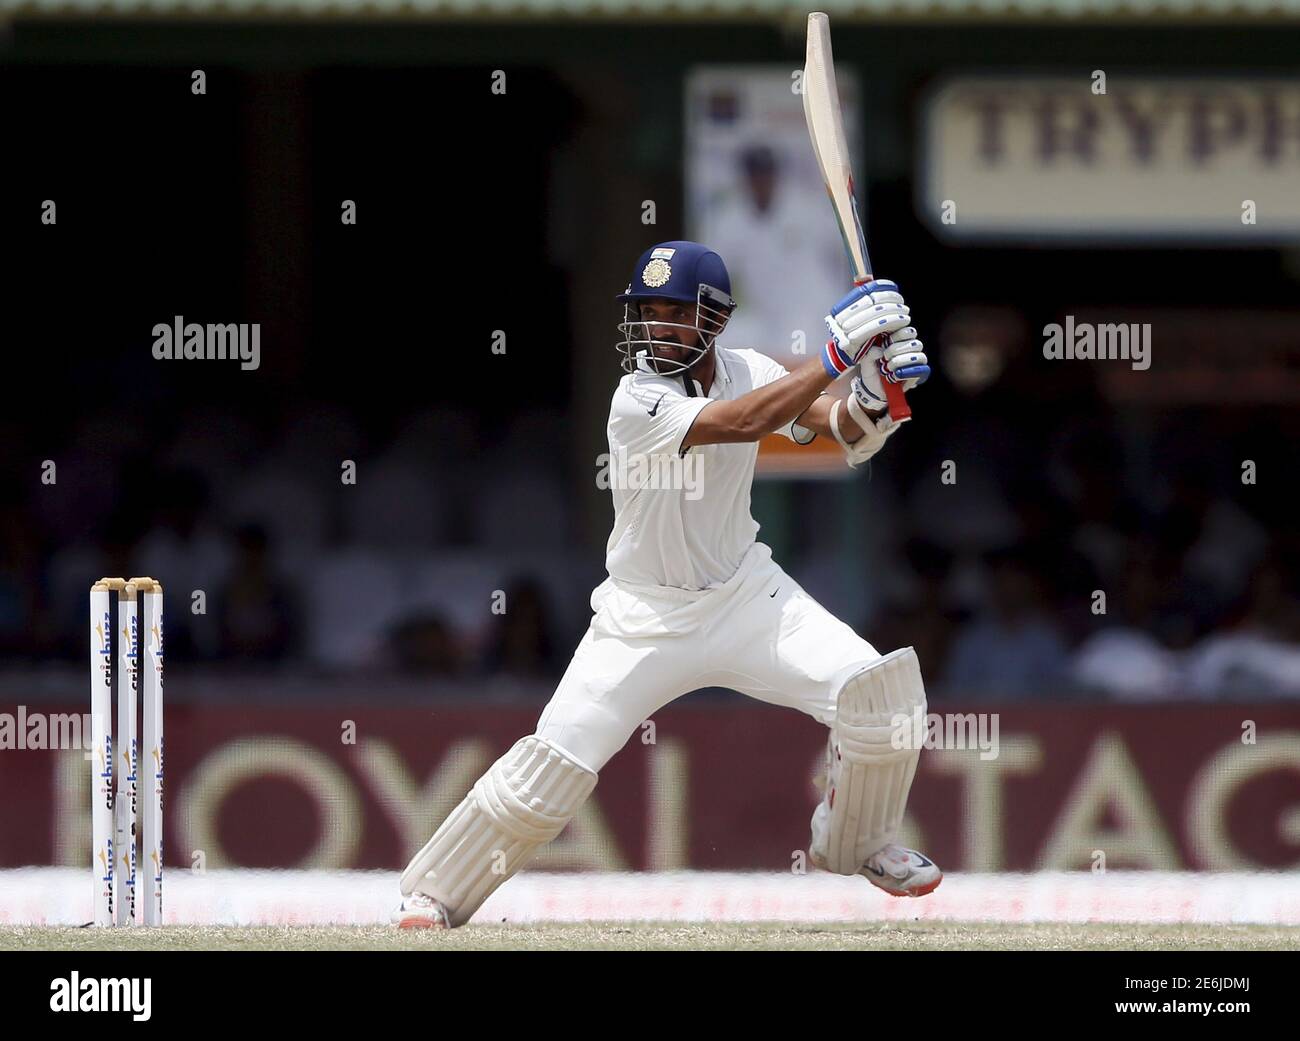 India's Ajinkya Rahane watches his shot during the fourth day of their second test cricket match against Sri Lanka in Colombo August 23, 2015. REUTERS/Dinuka Liyanawatte Stock Photo